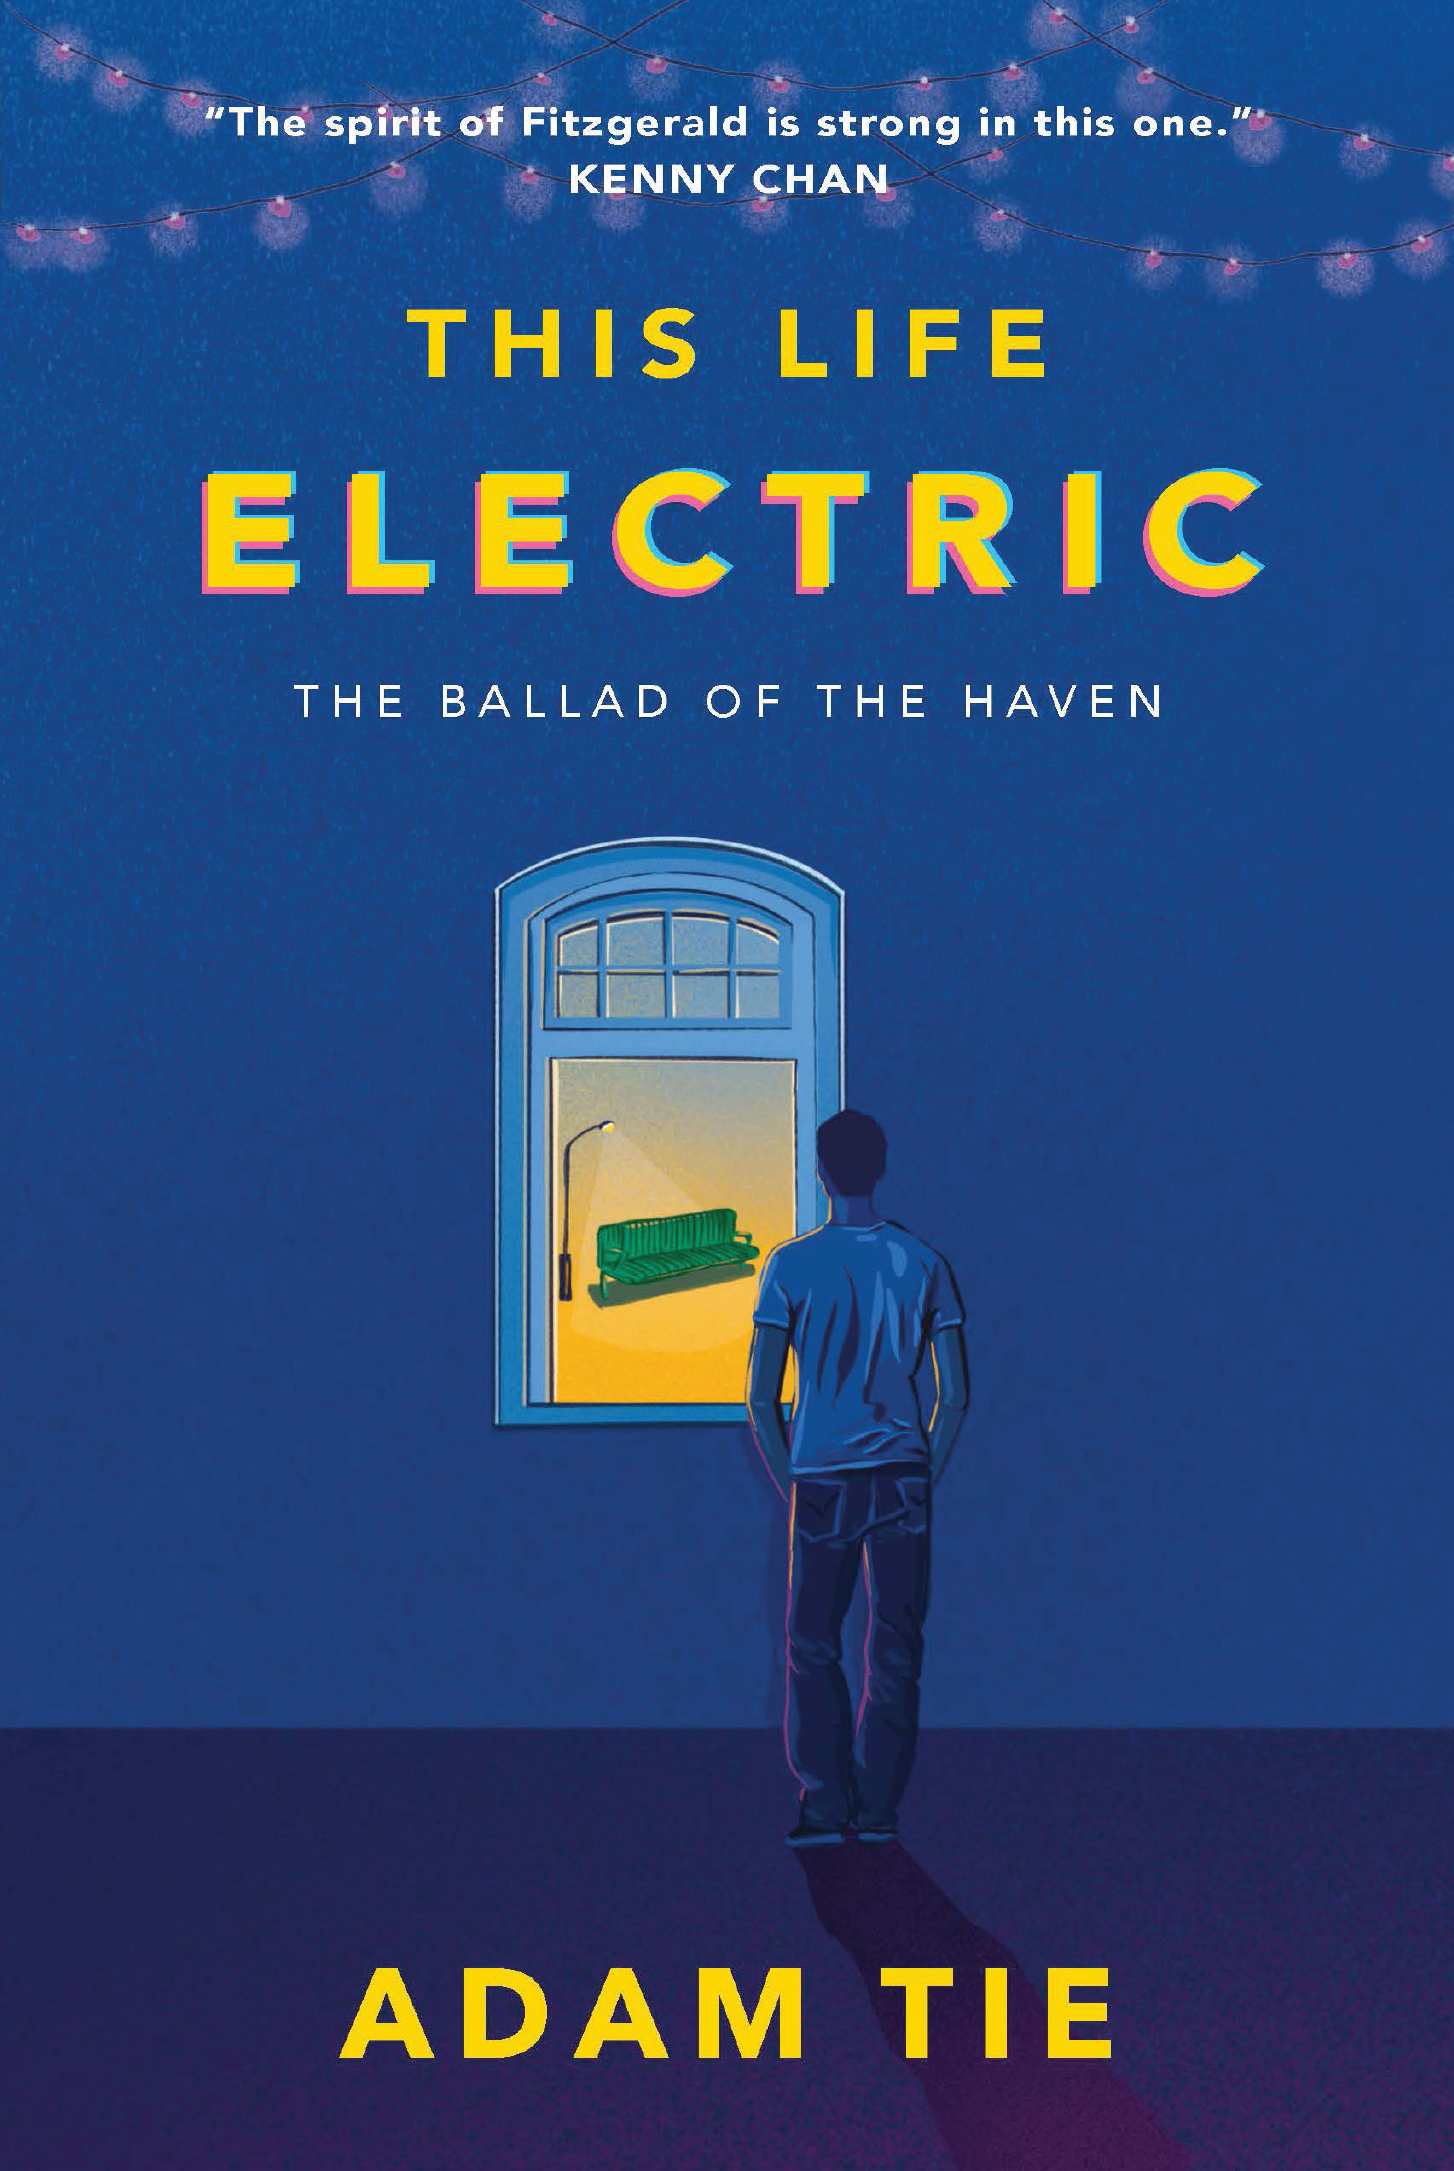 This Life Electric: The Ballad of the Haven